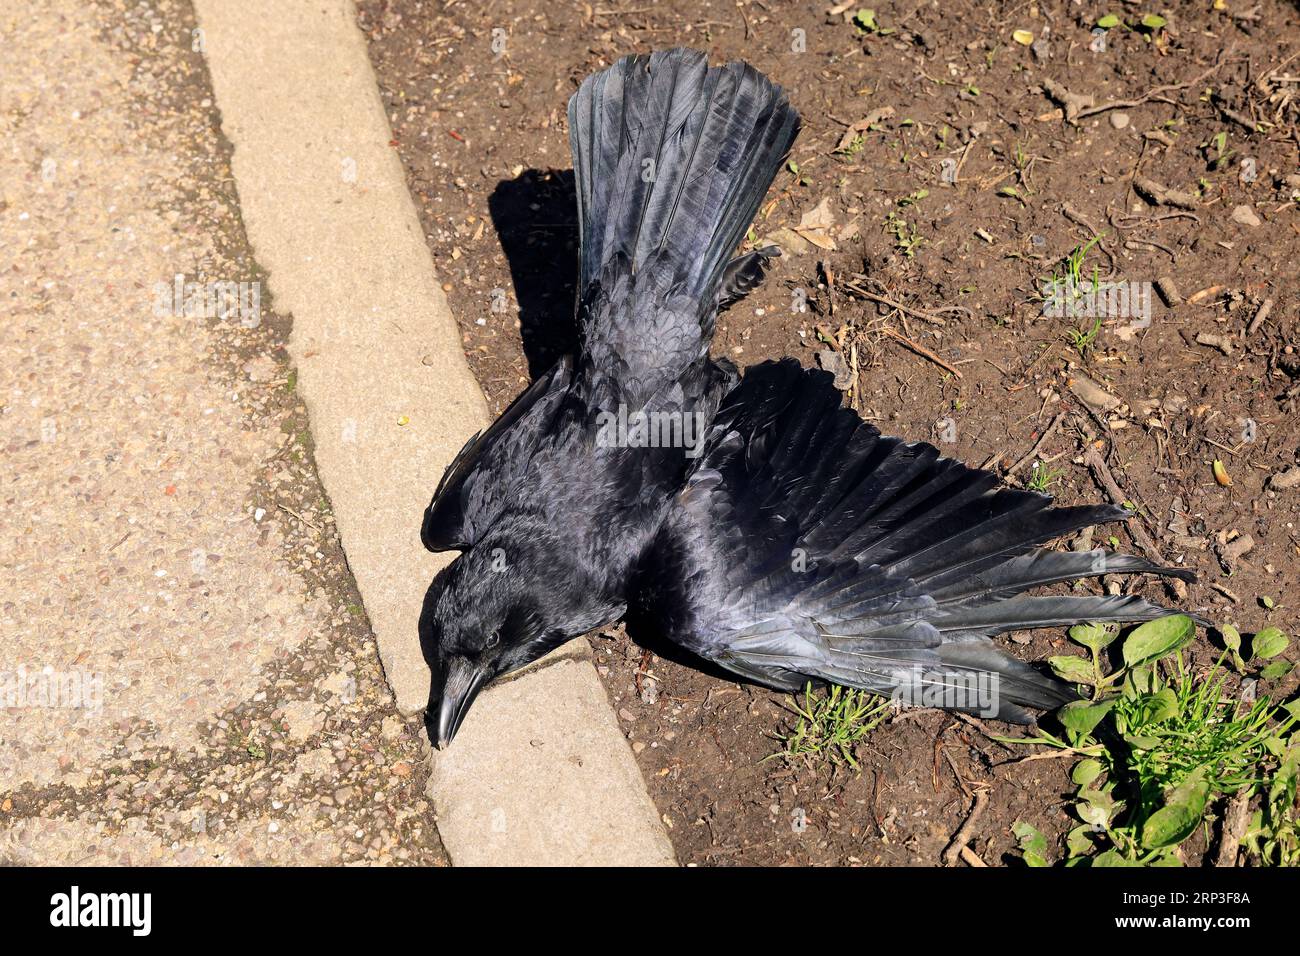 Dead crow by the side of a path Stock Photo